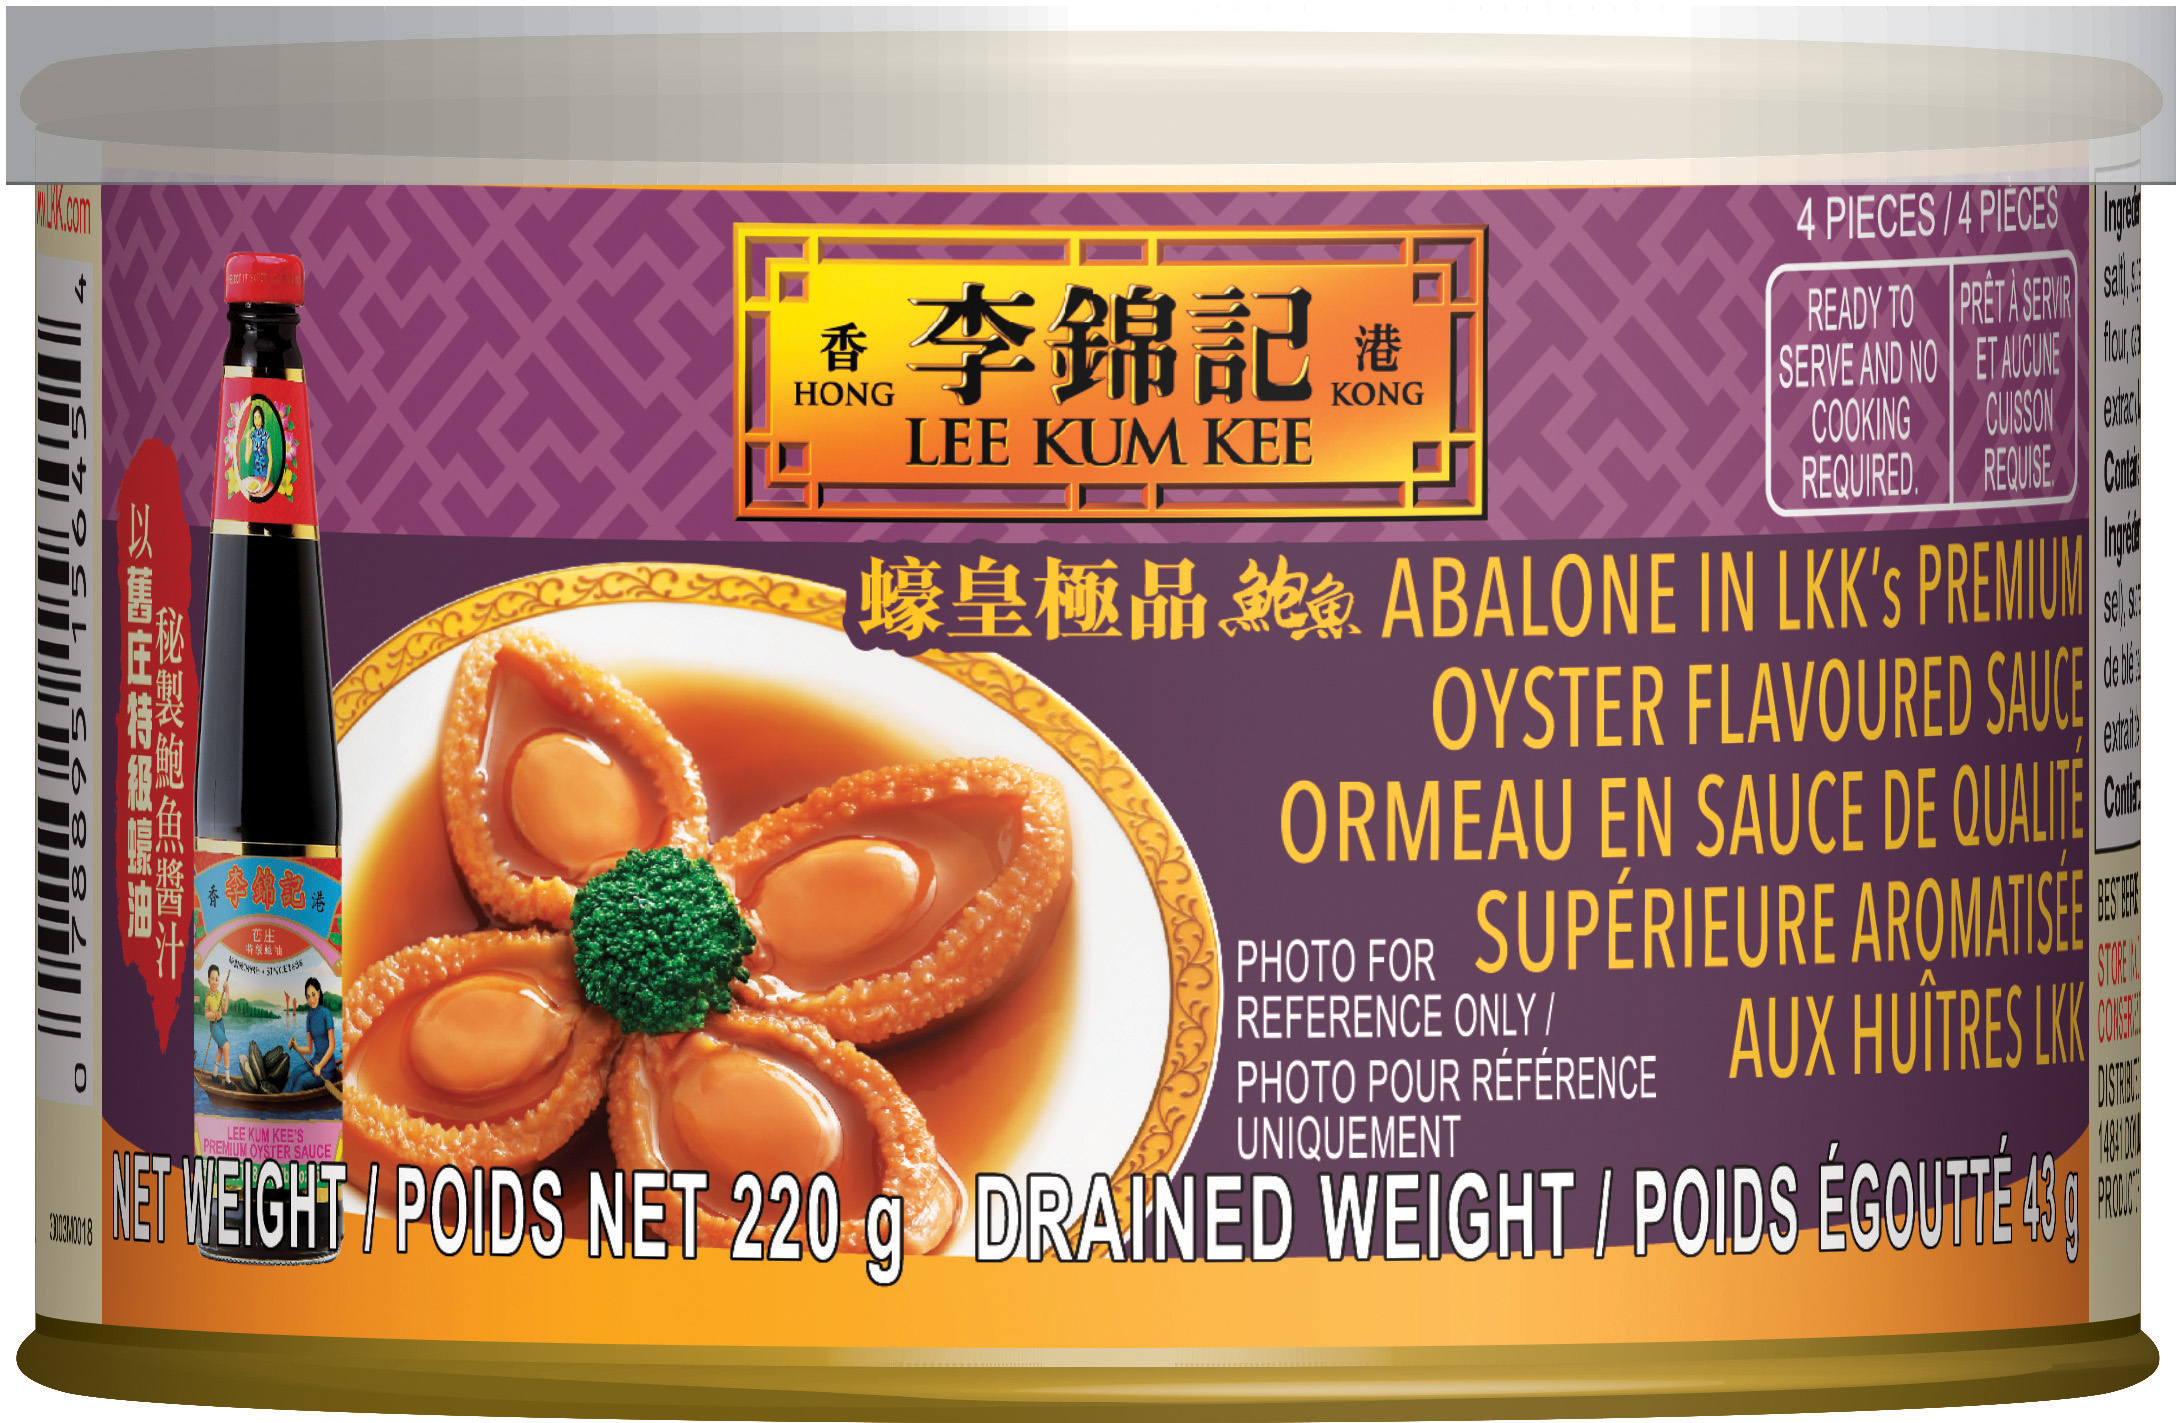 Abalone In LKK's Premium Oyster Flavoured Sauce, 220 g, can